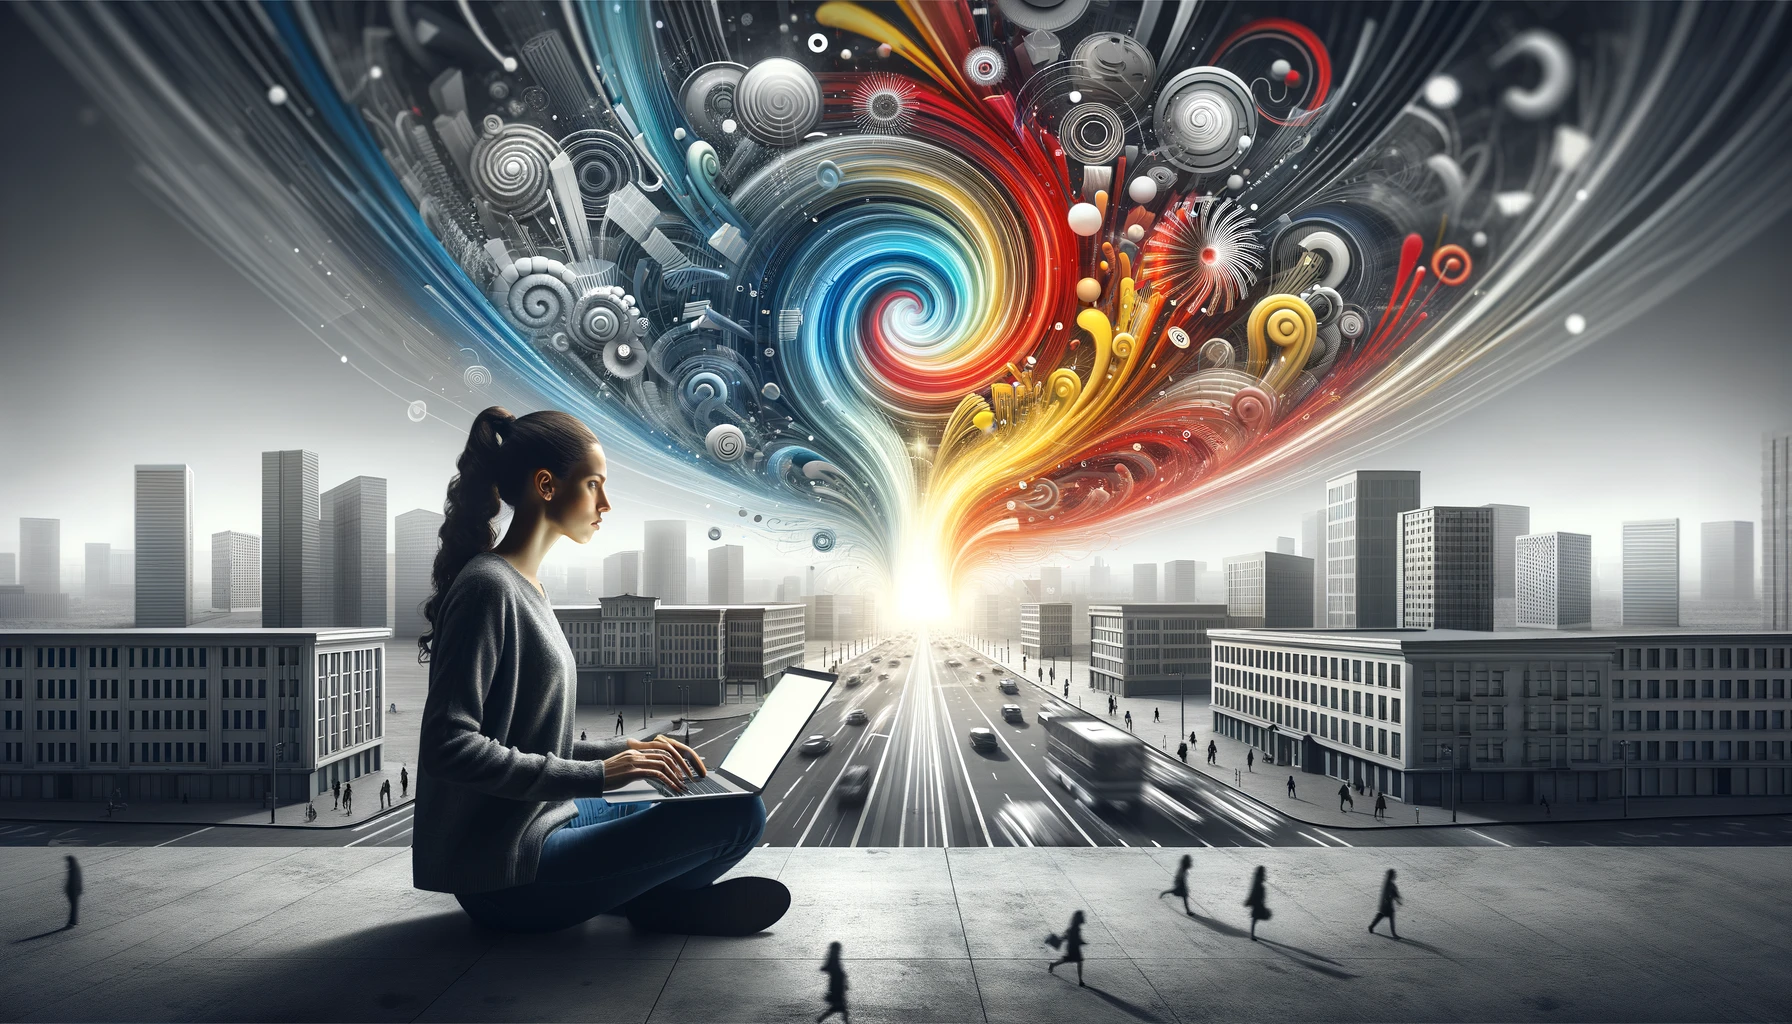 A young woman sits in the foreground focused on her laptop, which is the source of a swirling, colorful vortex of digital shapes against a greyscale backdrop of a contemporary cityscape, highlighting the intersection of technology and modern life.